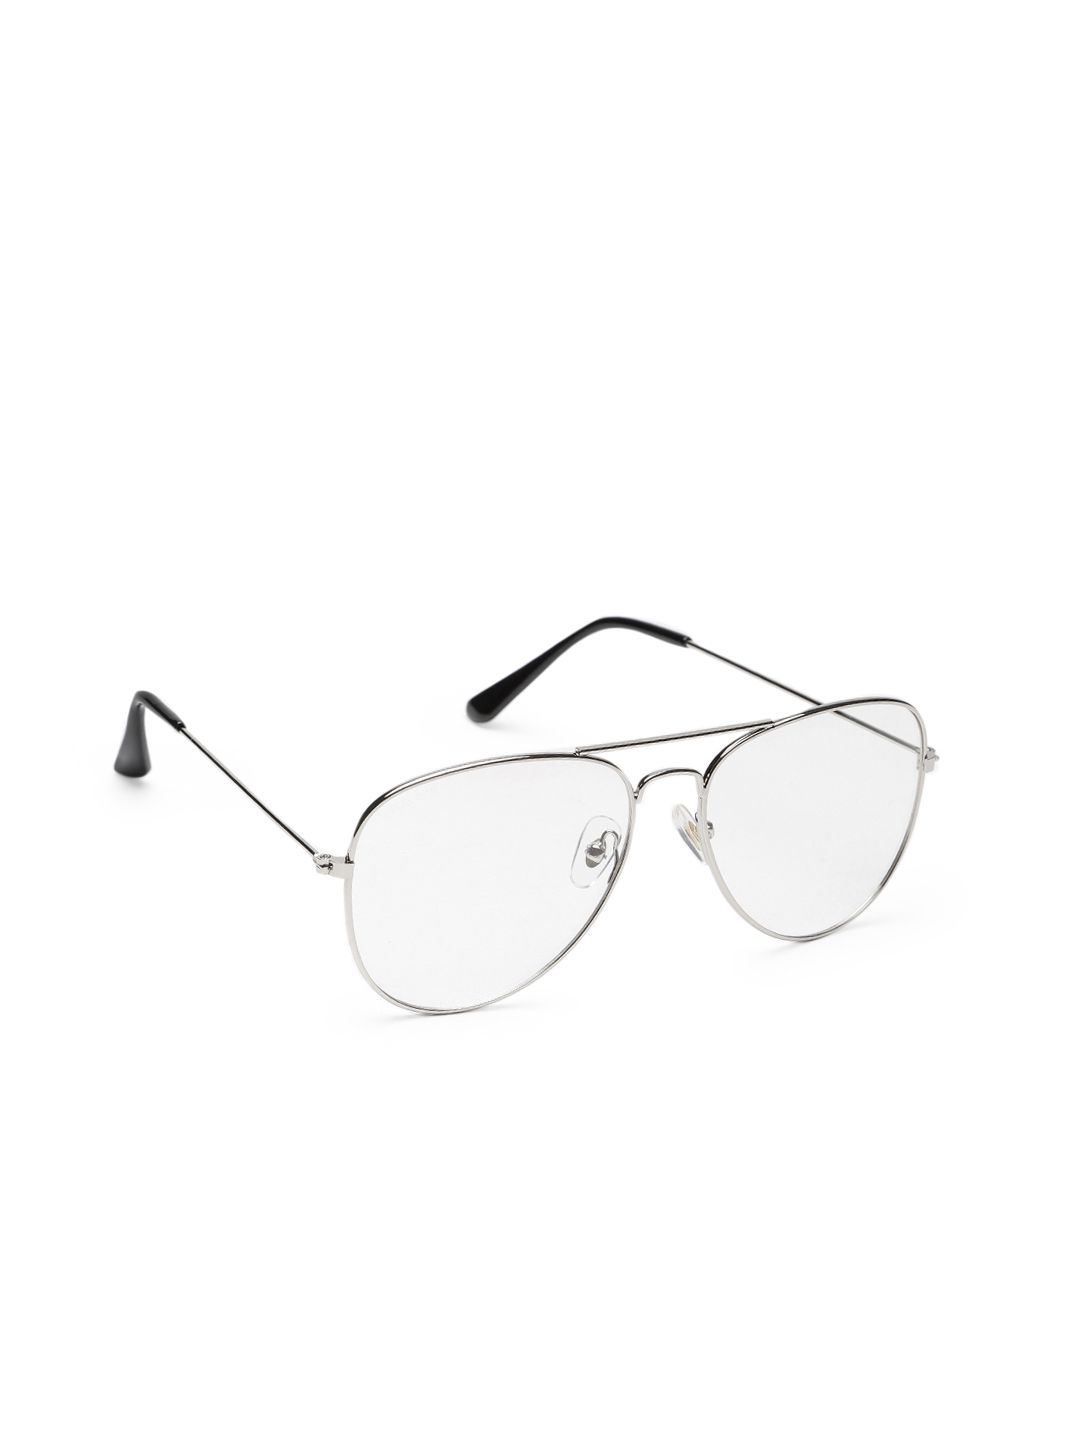 ROYAL SON Unisex Aviator Sunglasses RS0026DP-SF Price in India